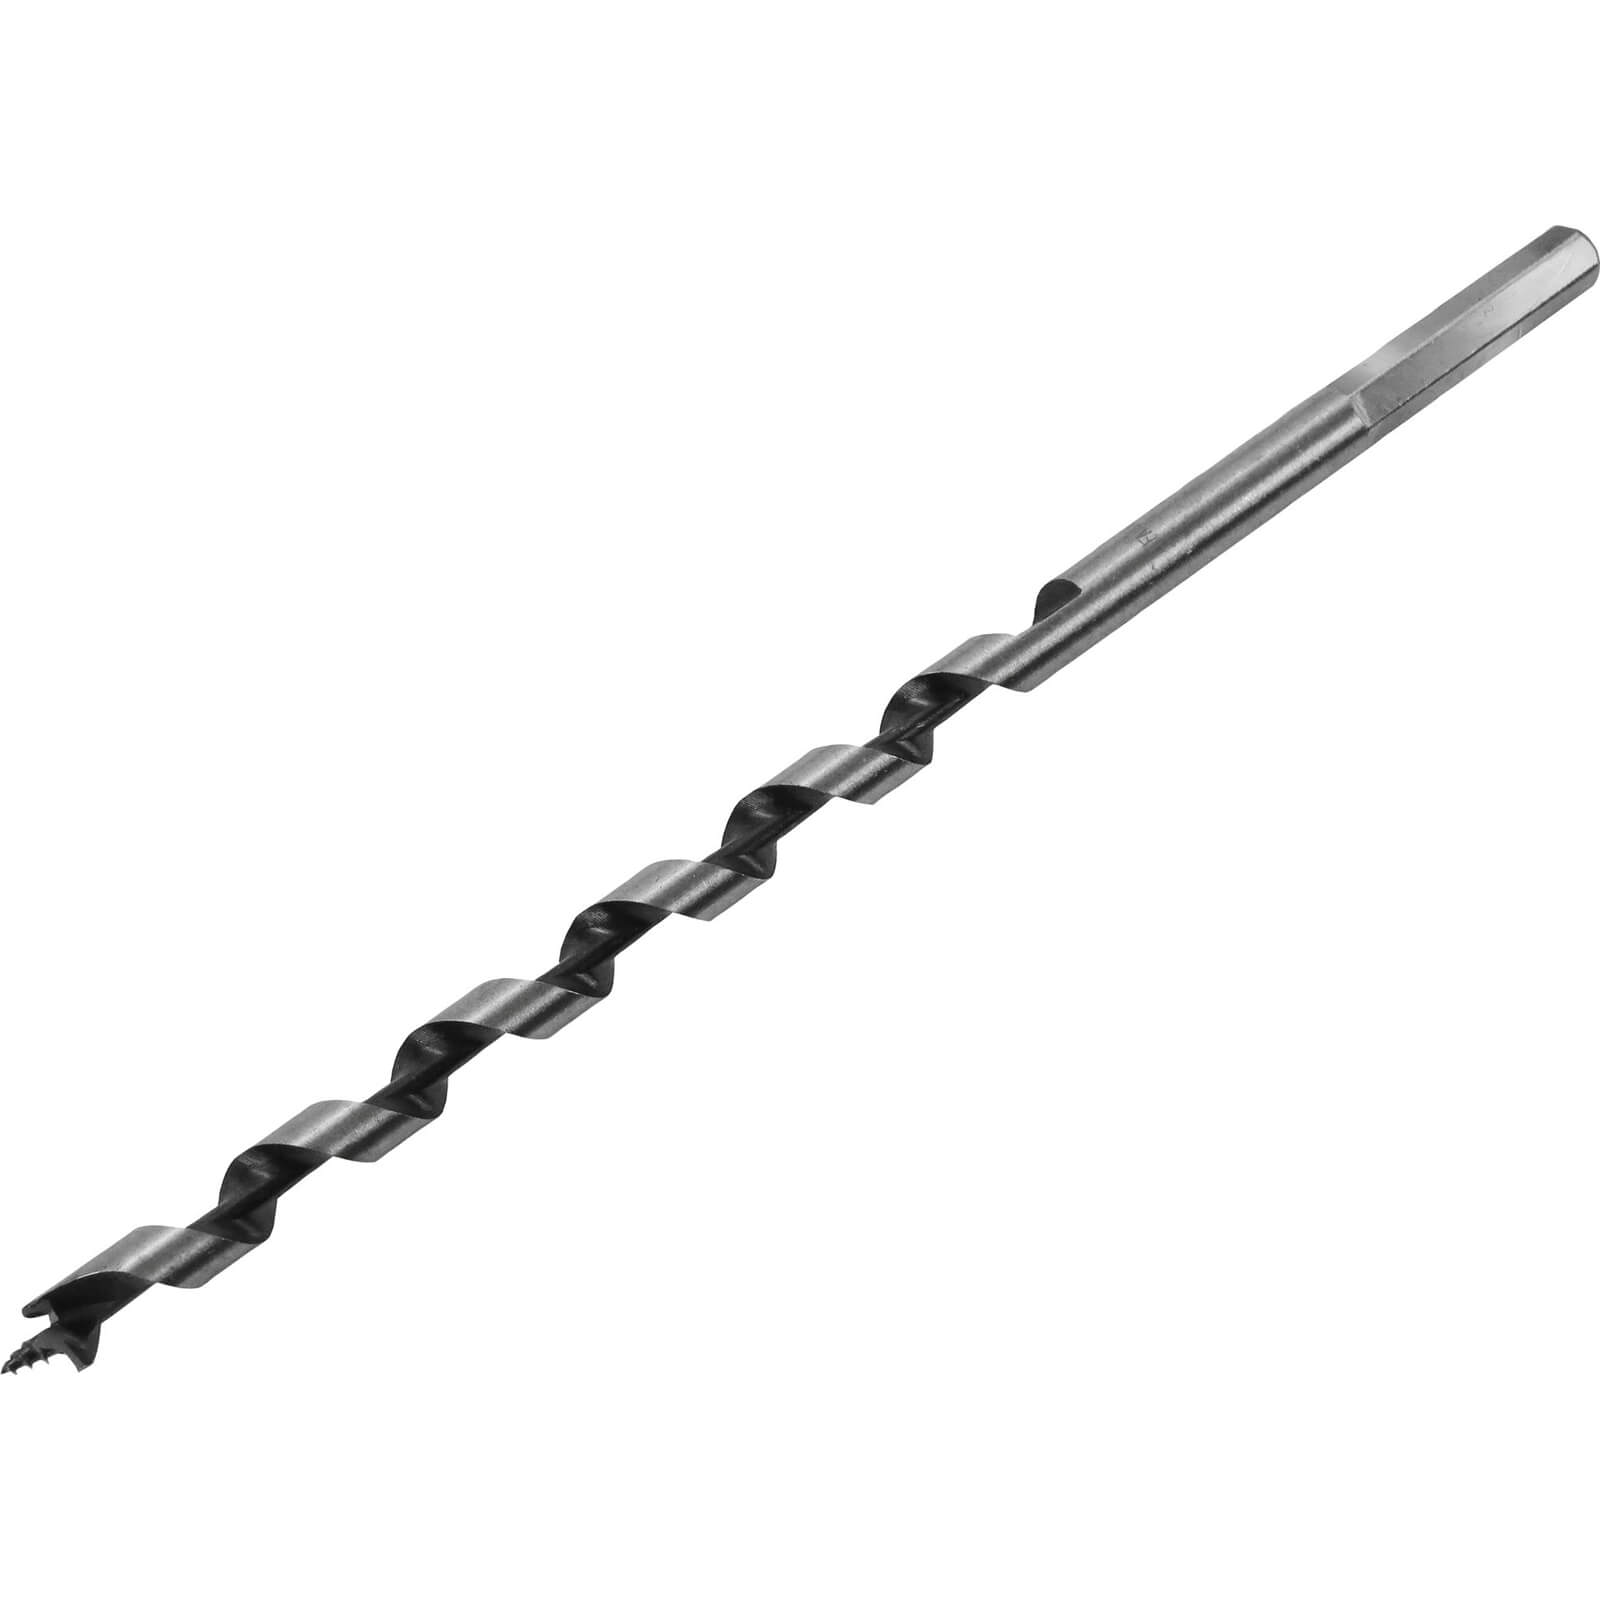 Image of Faithfull Combination Auger Drill Bit 6mm 200mm